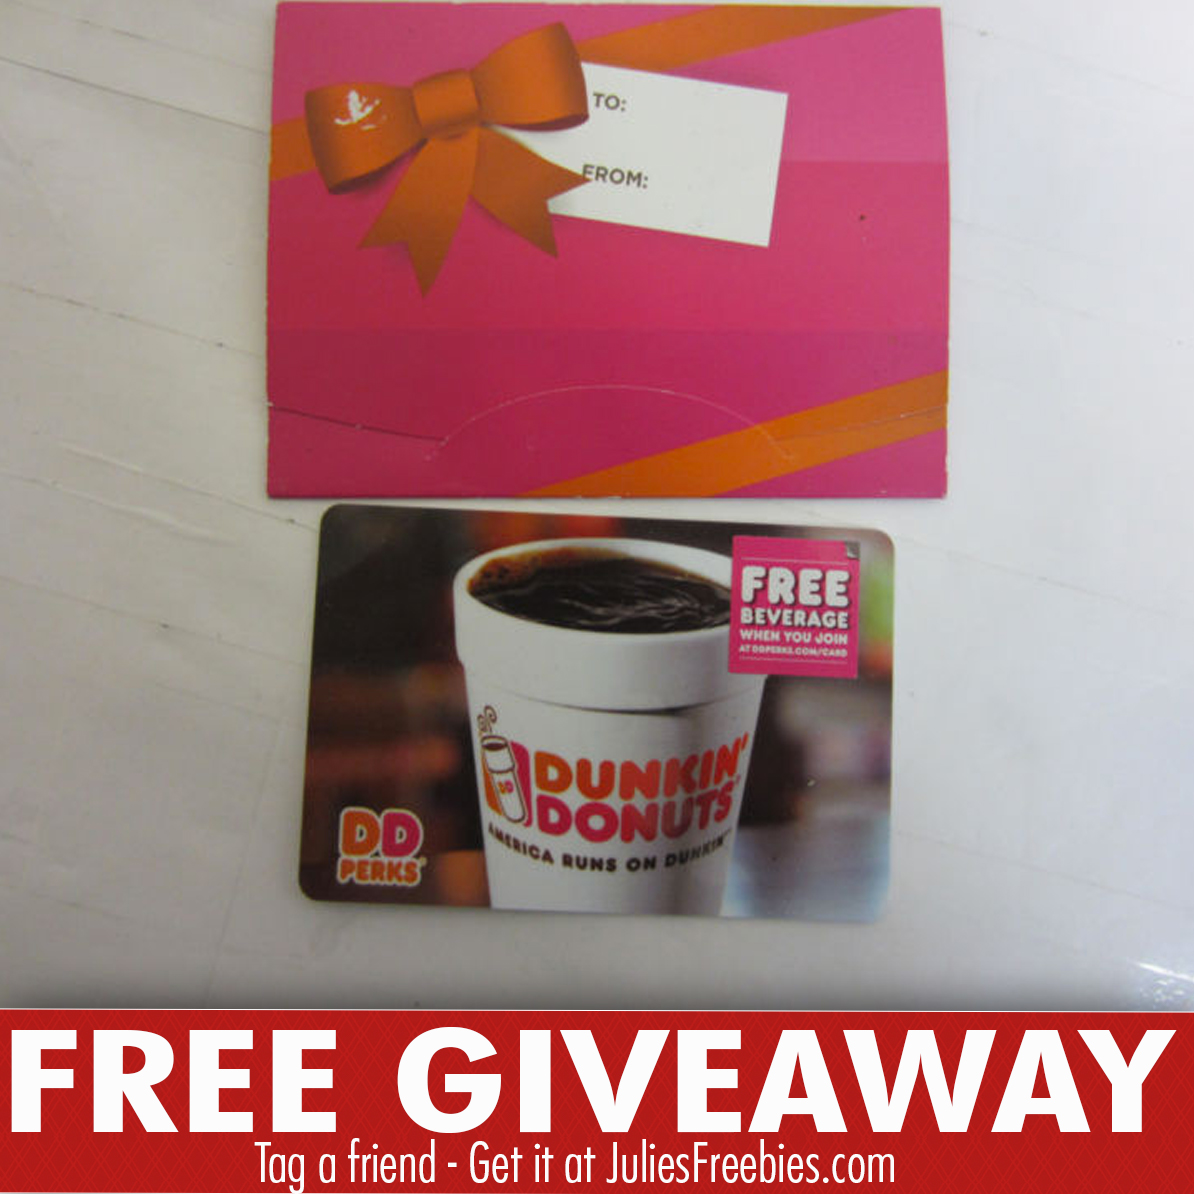 saucony dunkin sweepstakes